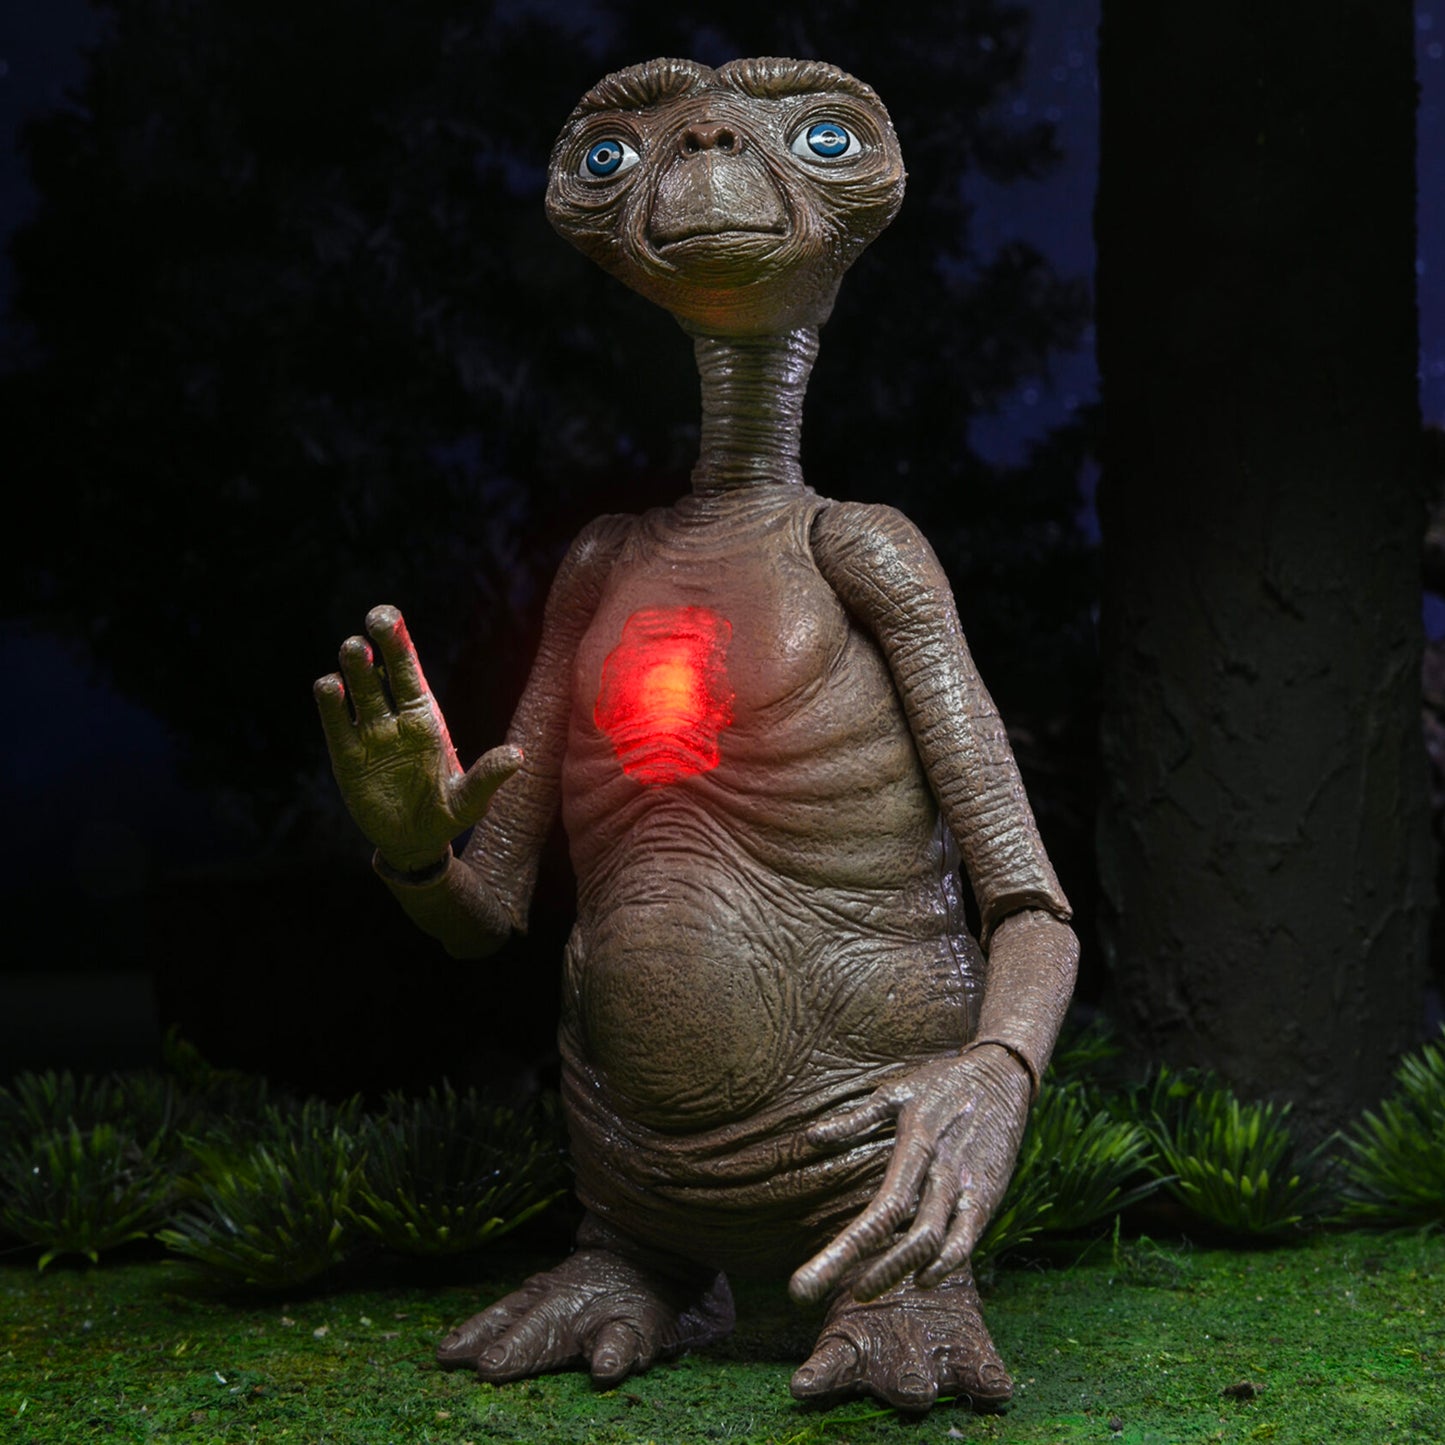 NECA: E.T. - Deluxe Ultimate E.T. with LED Chest 7" Tall Action Figure